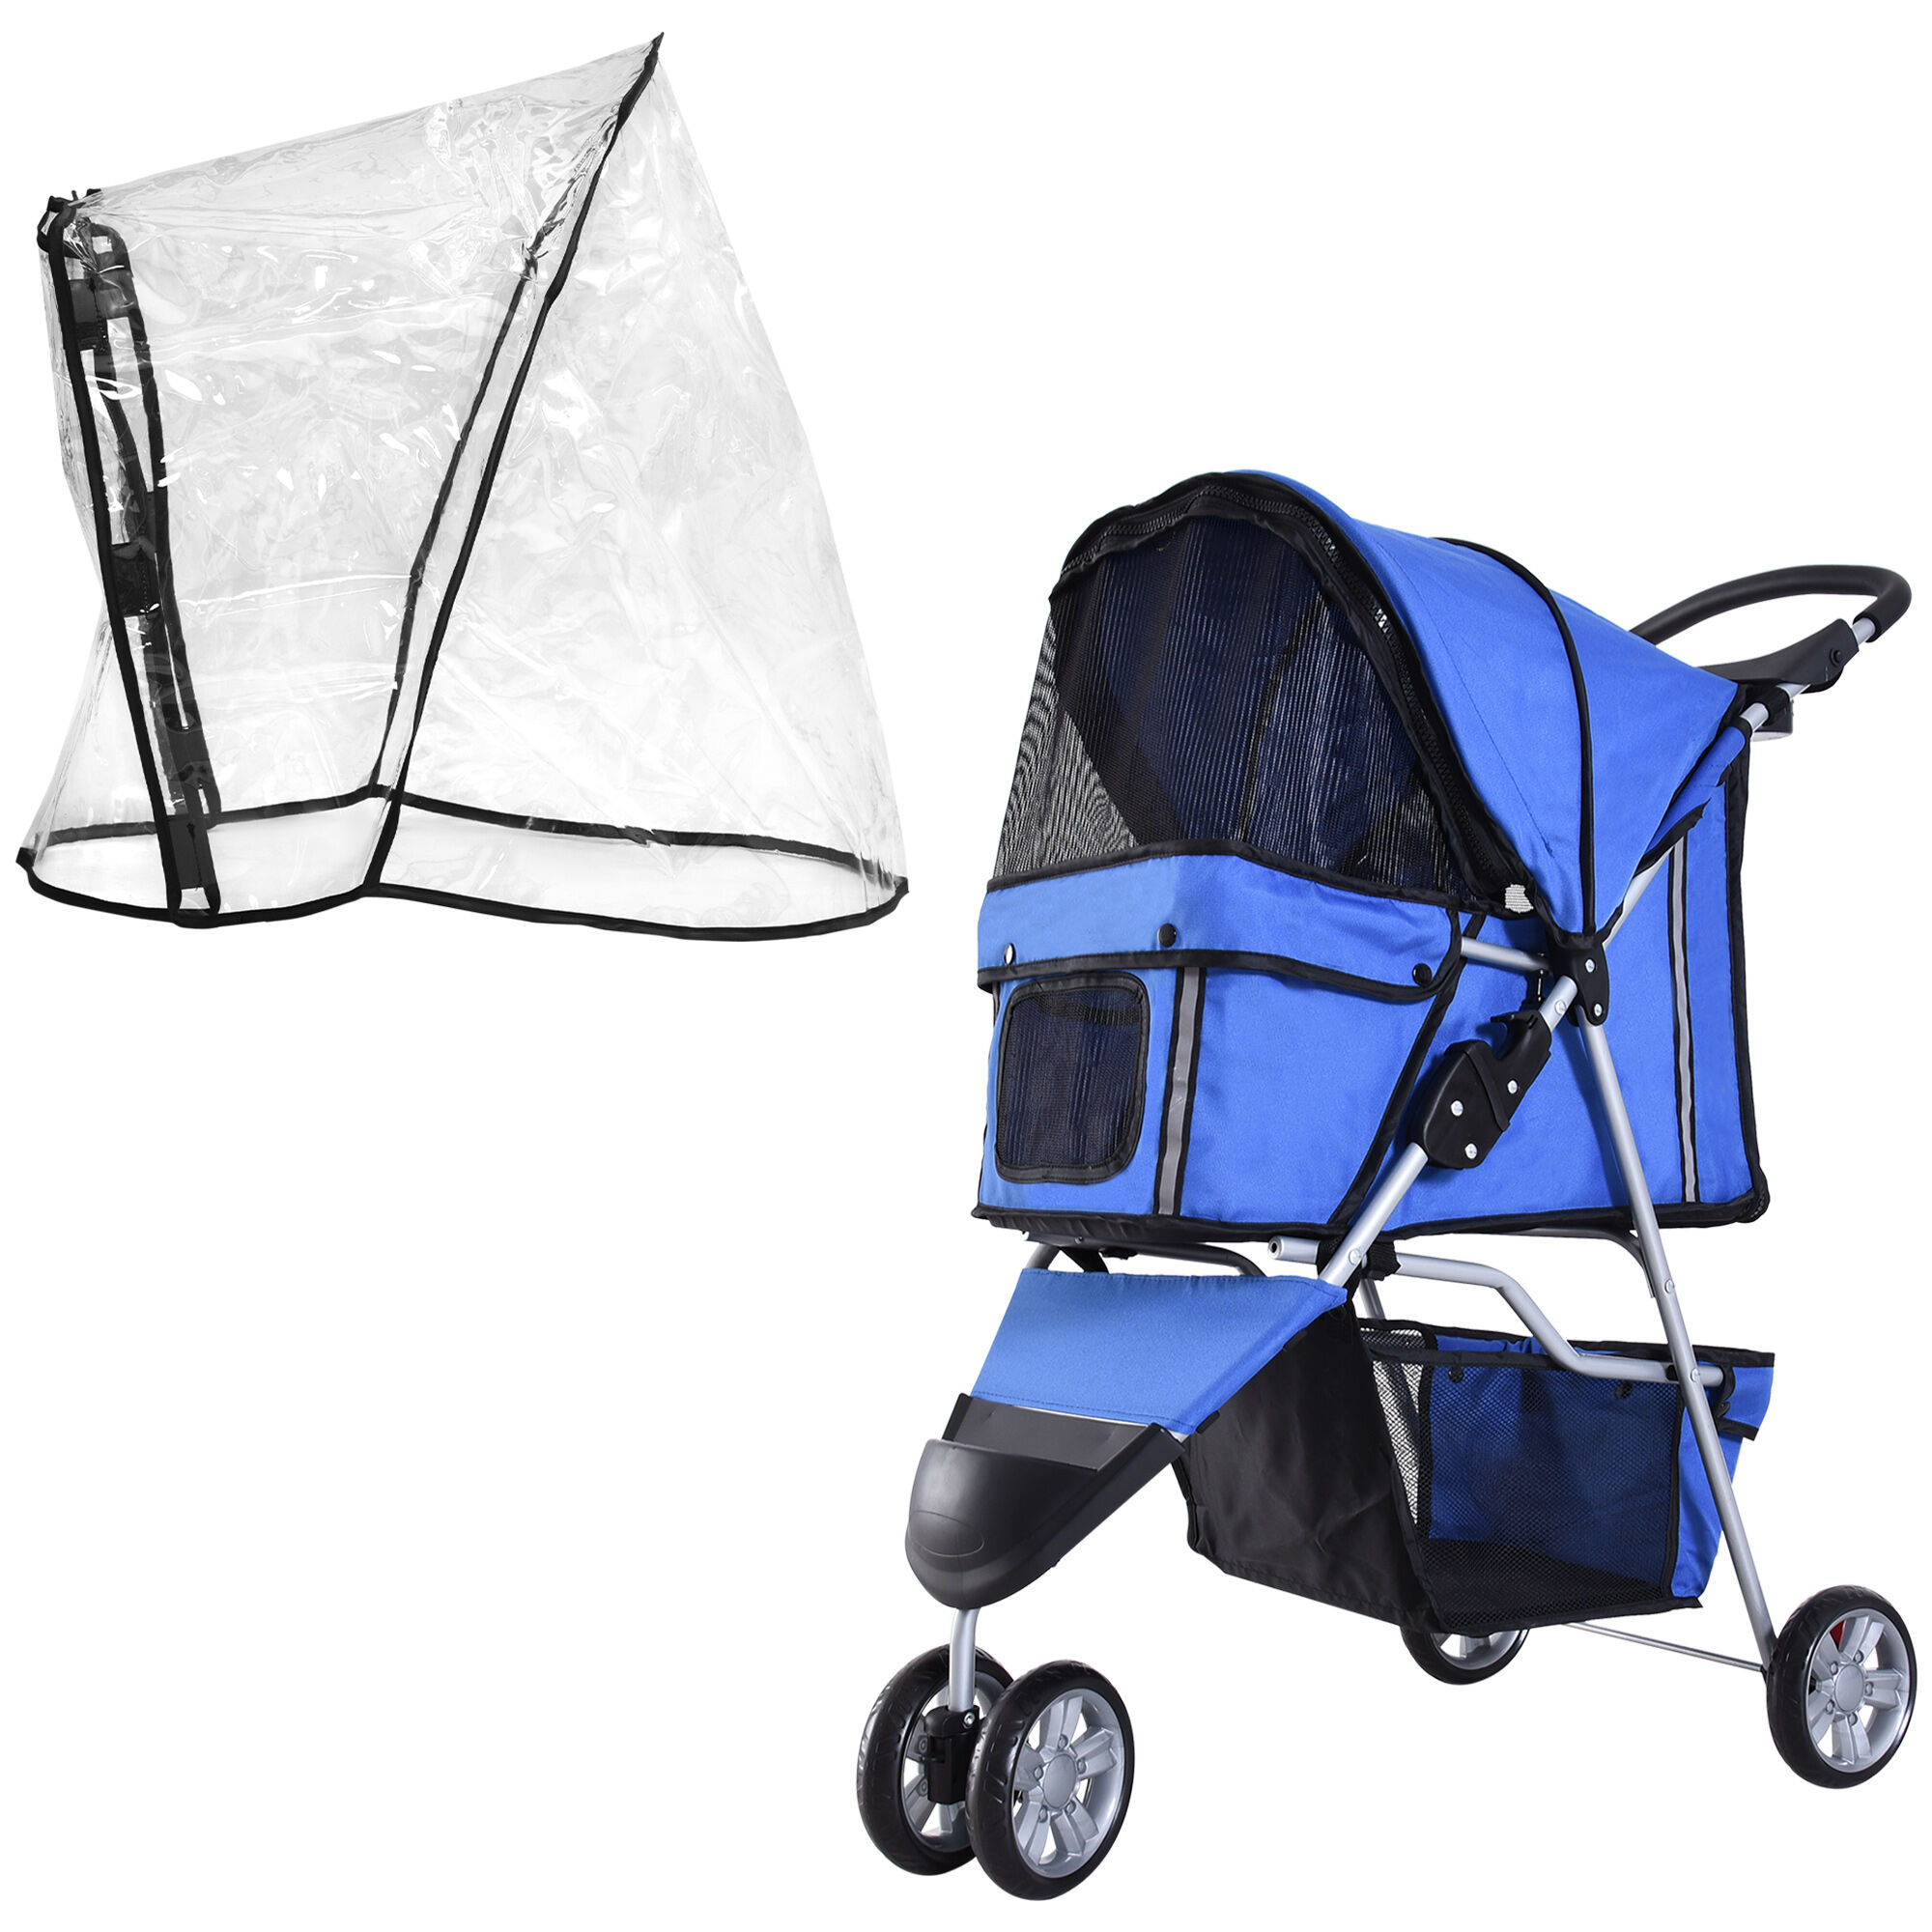 PawHut Dog Stroller, Miniature Dog and Cat Pushchair with Cover, Cup Holder, Storage, Reflective Safety Strips, Blue